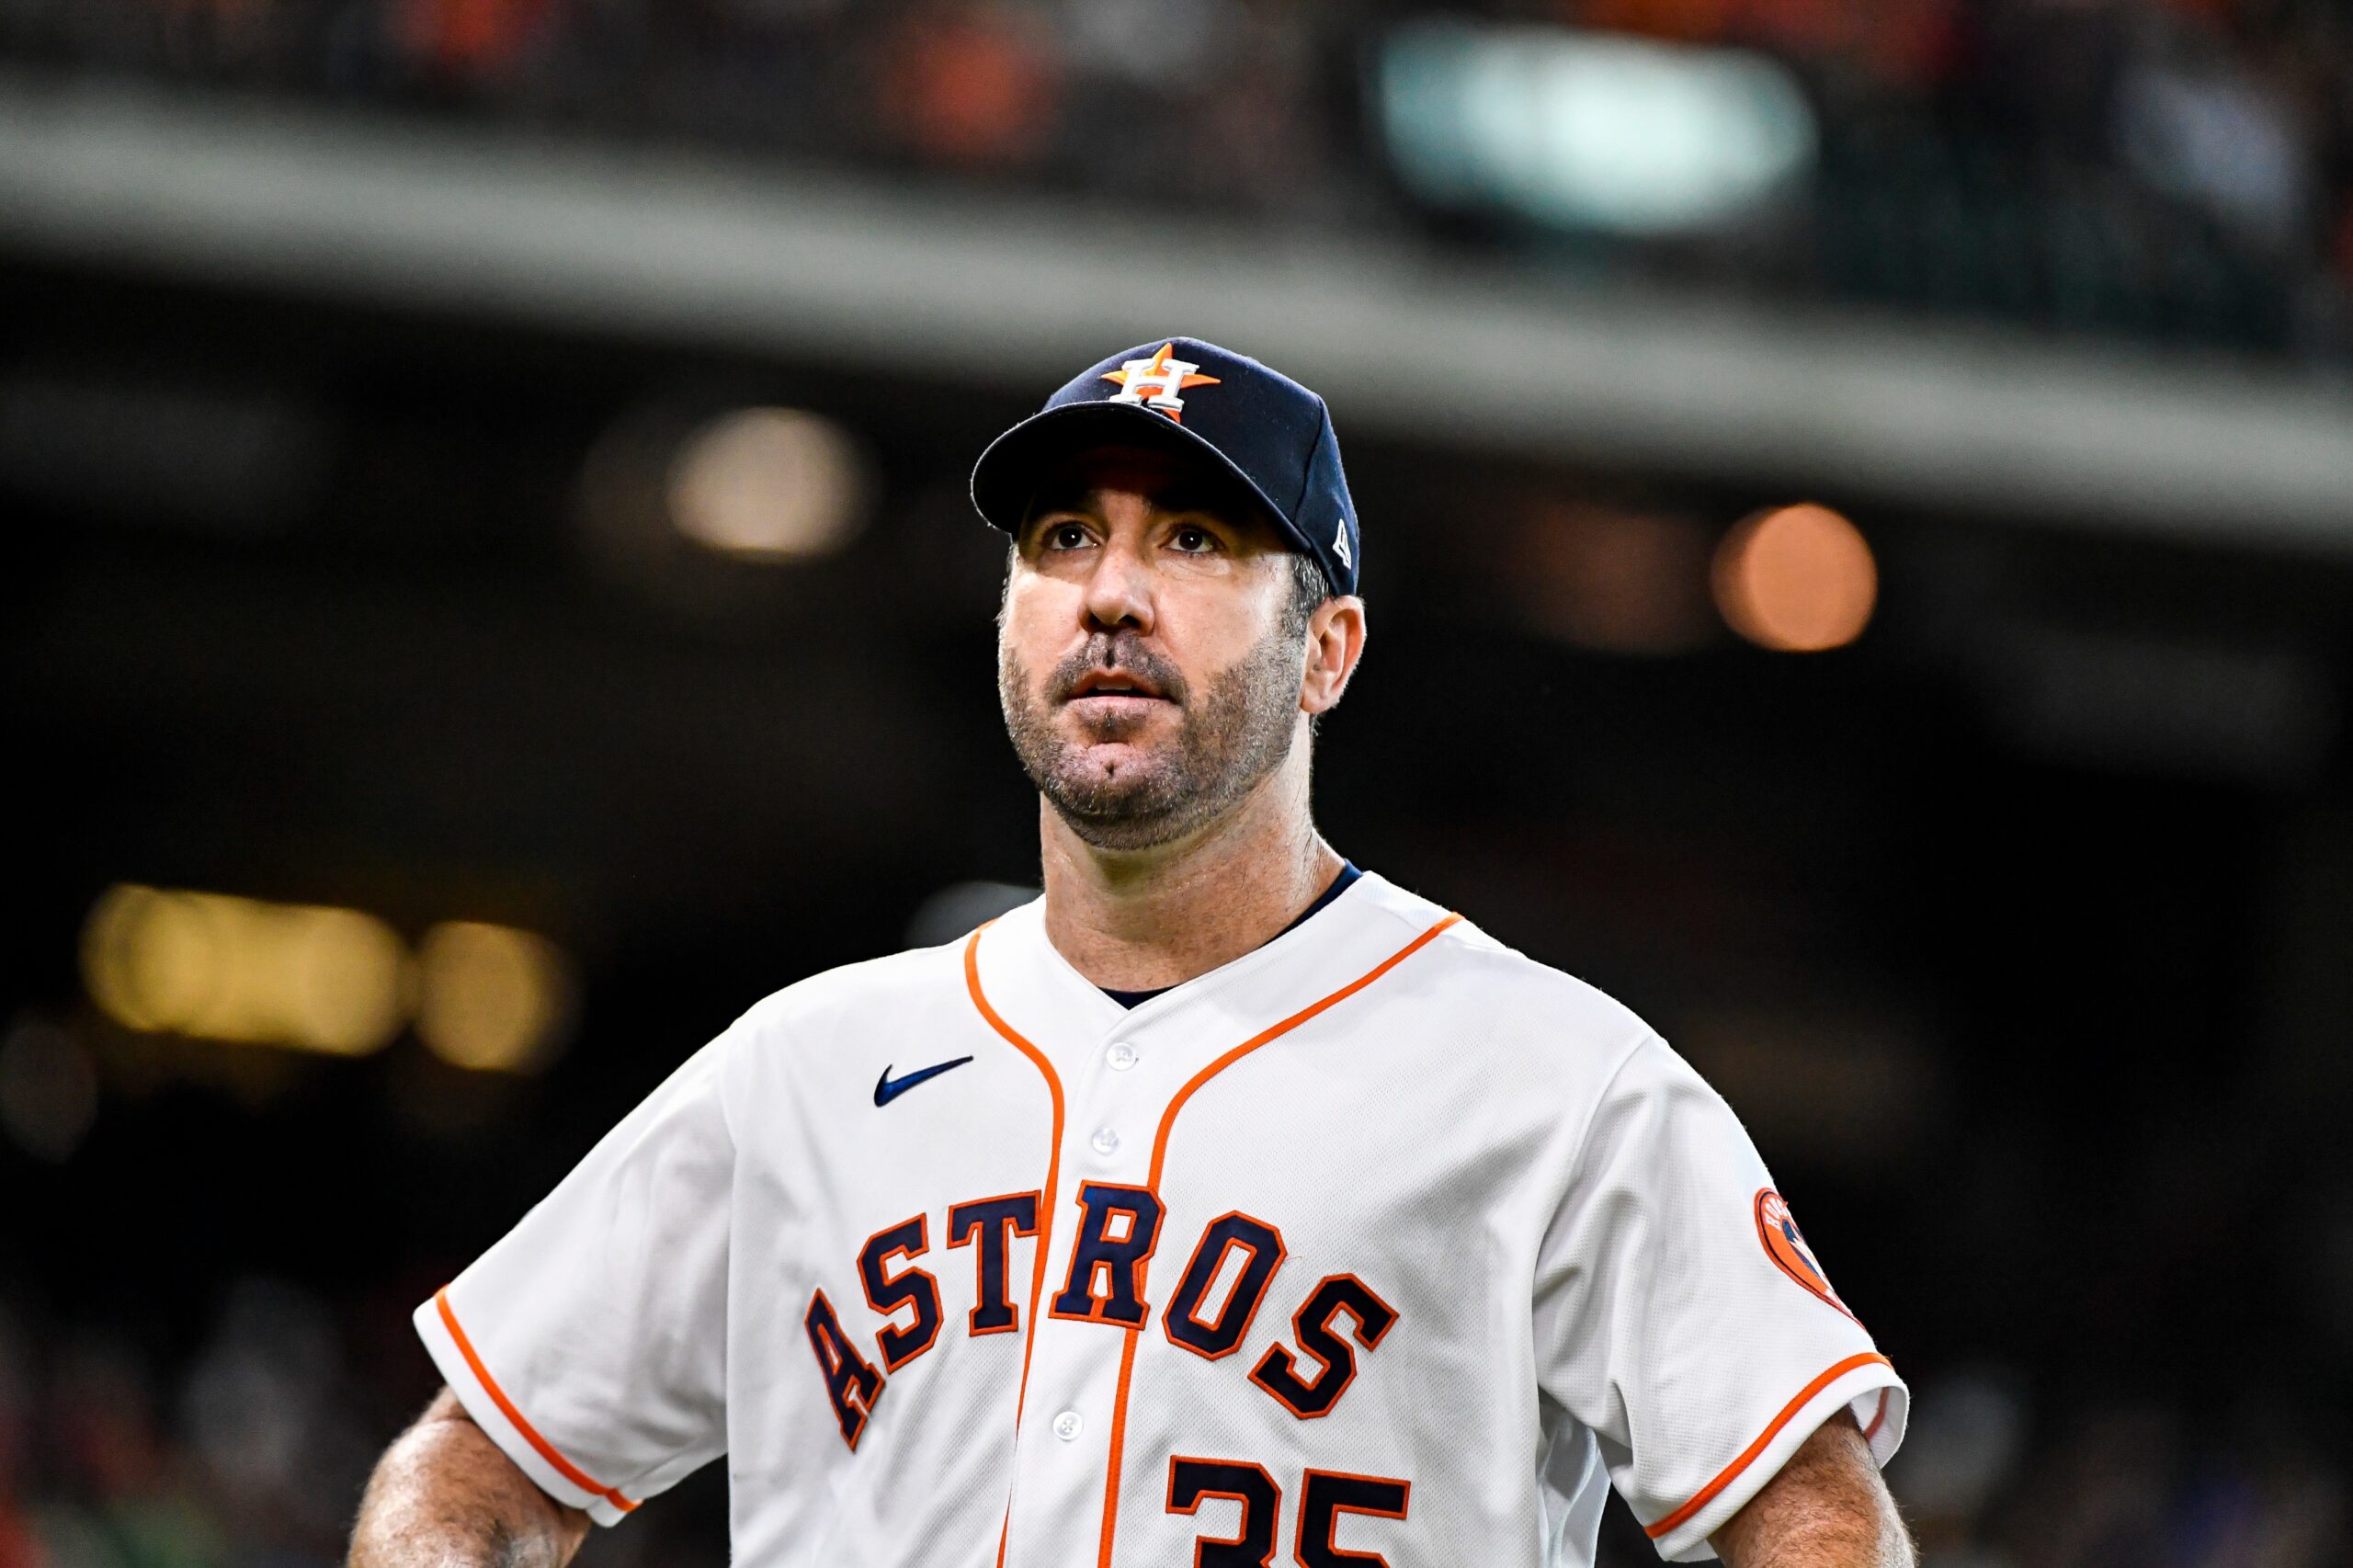 Phillies vs Astros Odds, Picks, Predictions: Tuesday MLB Betting Guide article feature image